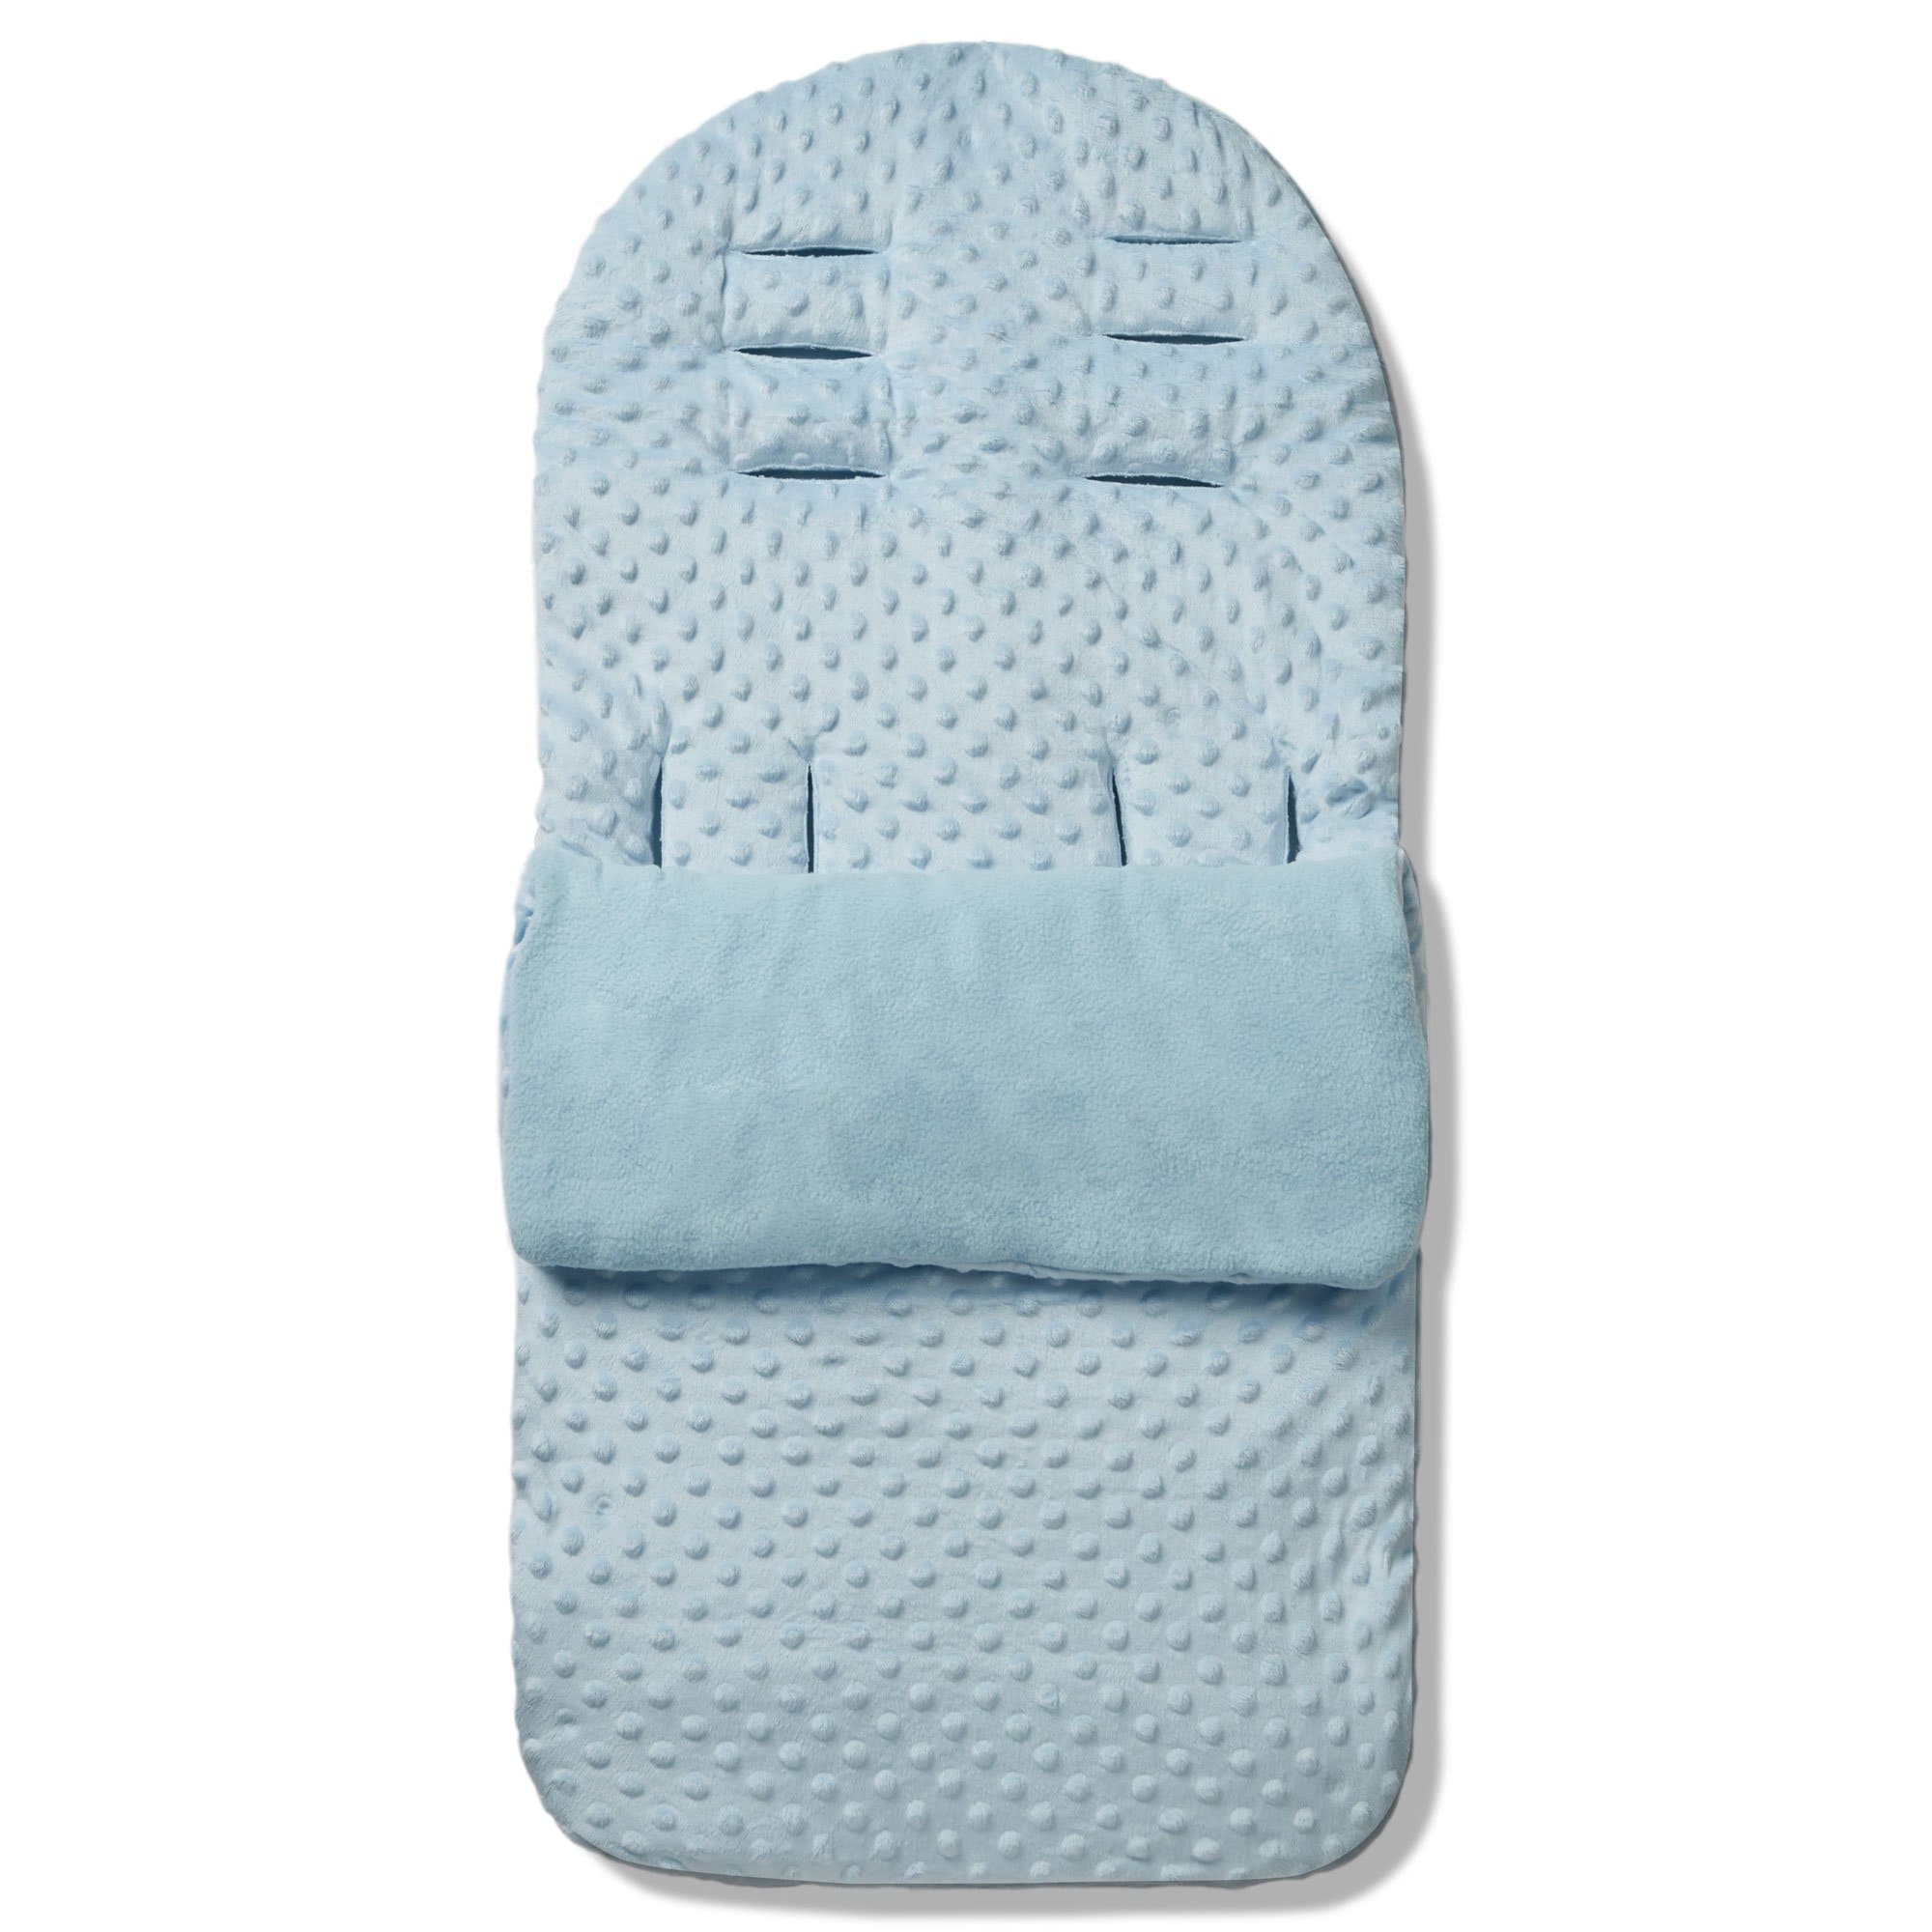 Dimple Footmuff / Cosy Toes Compatible with Joie - Blue / Fits All Models | For Your Little One